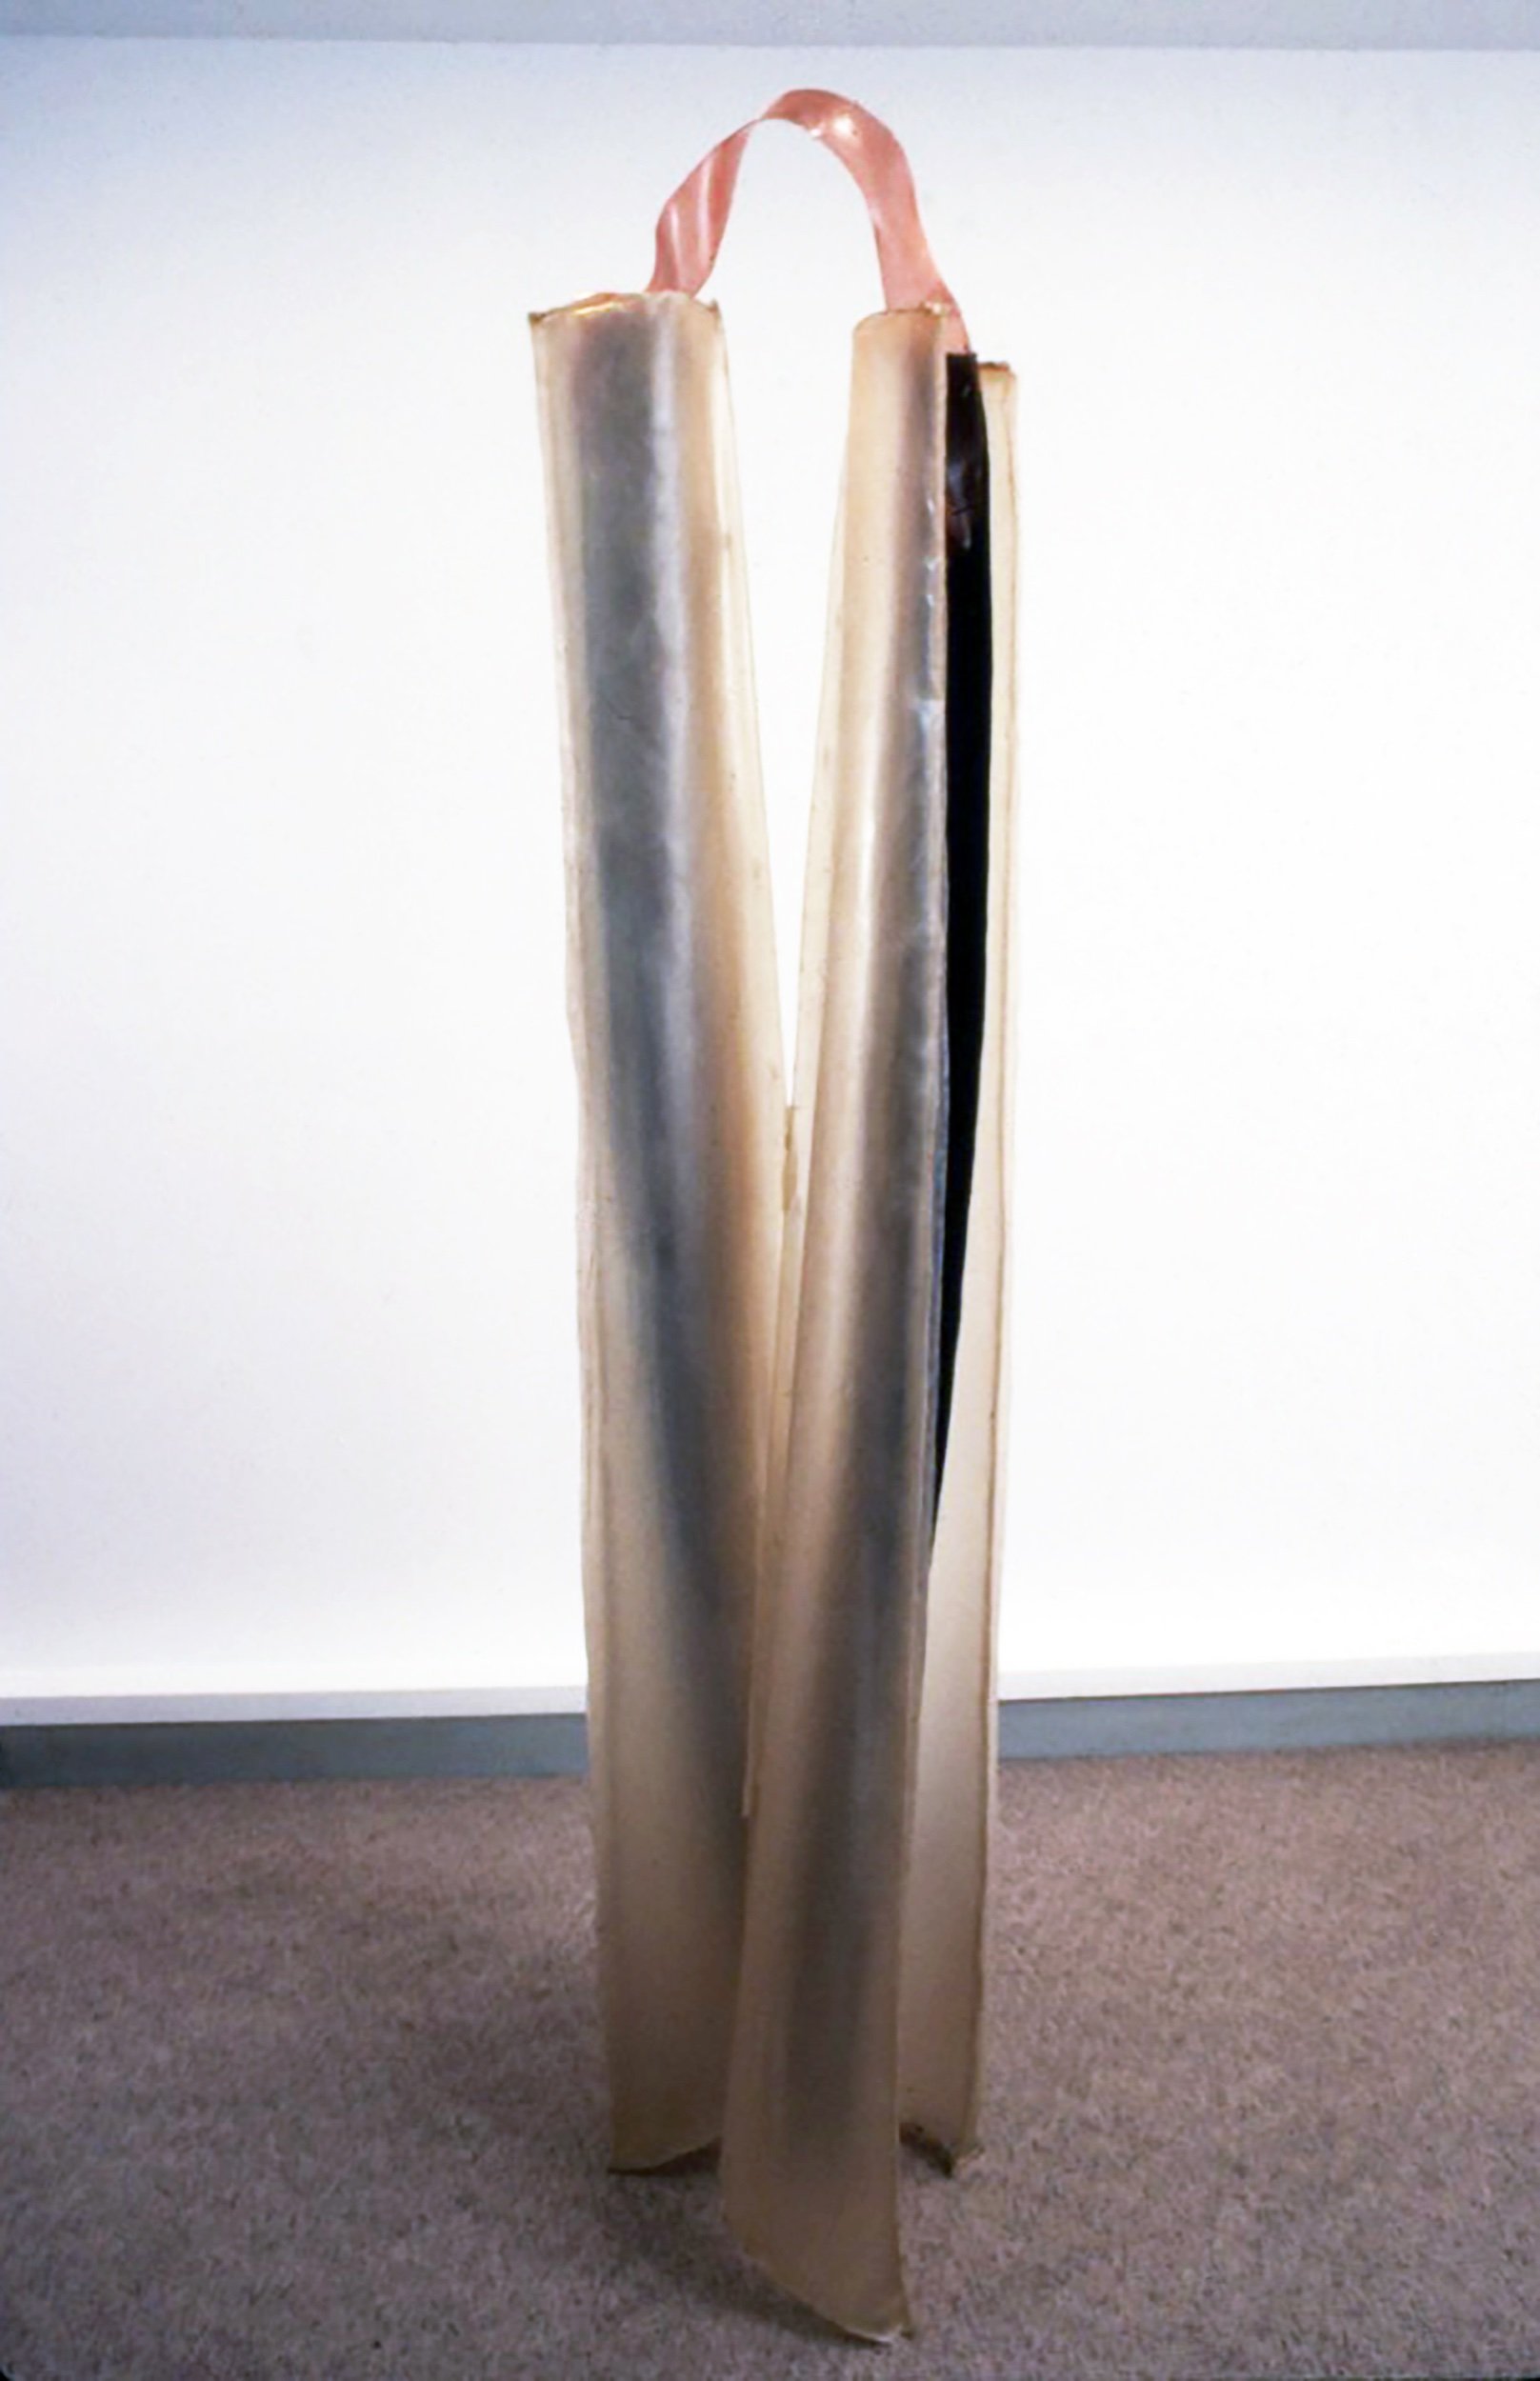  A.K., 1984, fiberglass and resin, 7’8” tall  Still others employ a "hairpin" element that forms the basis of the extrapolations at Lawrence Oliver. The "hairpin" form used as legs, or stacked. or joined with a lozenge form - becomes in both collecti